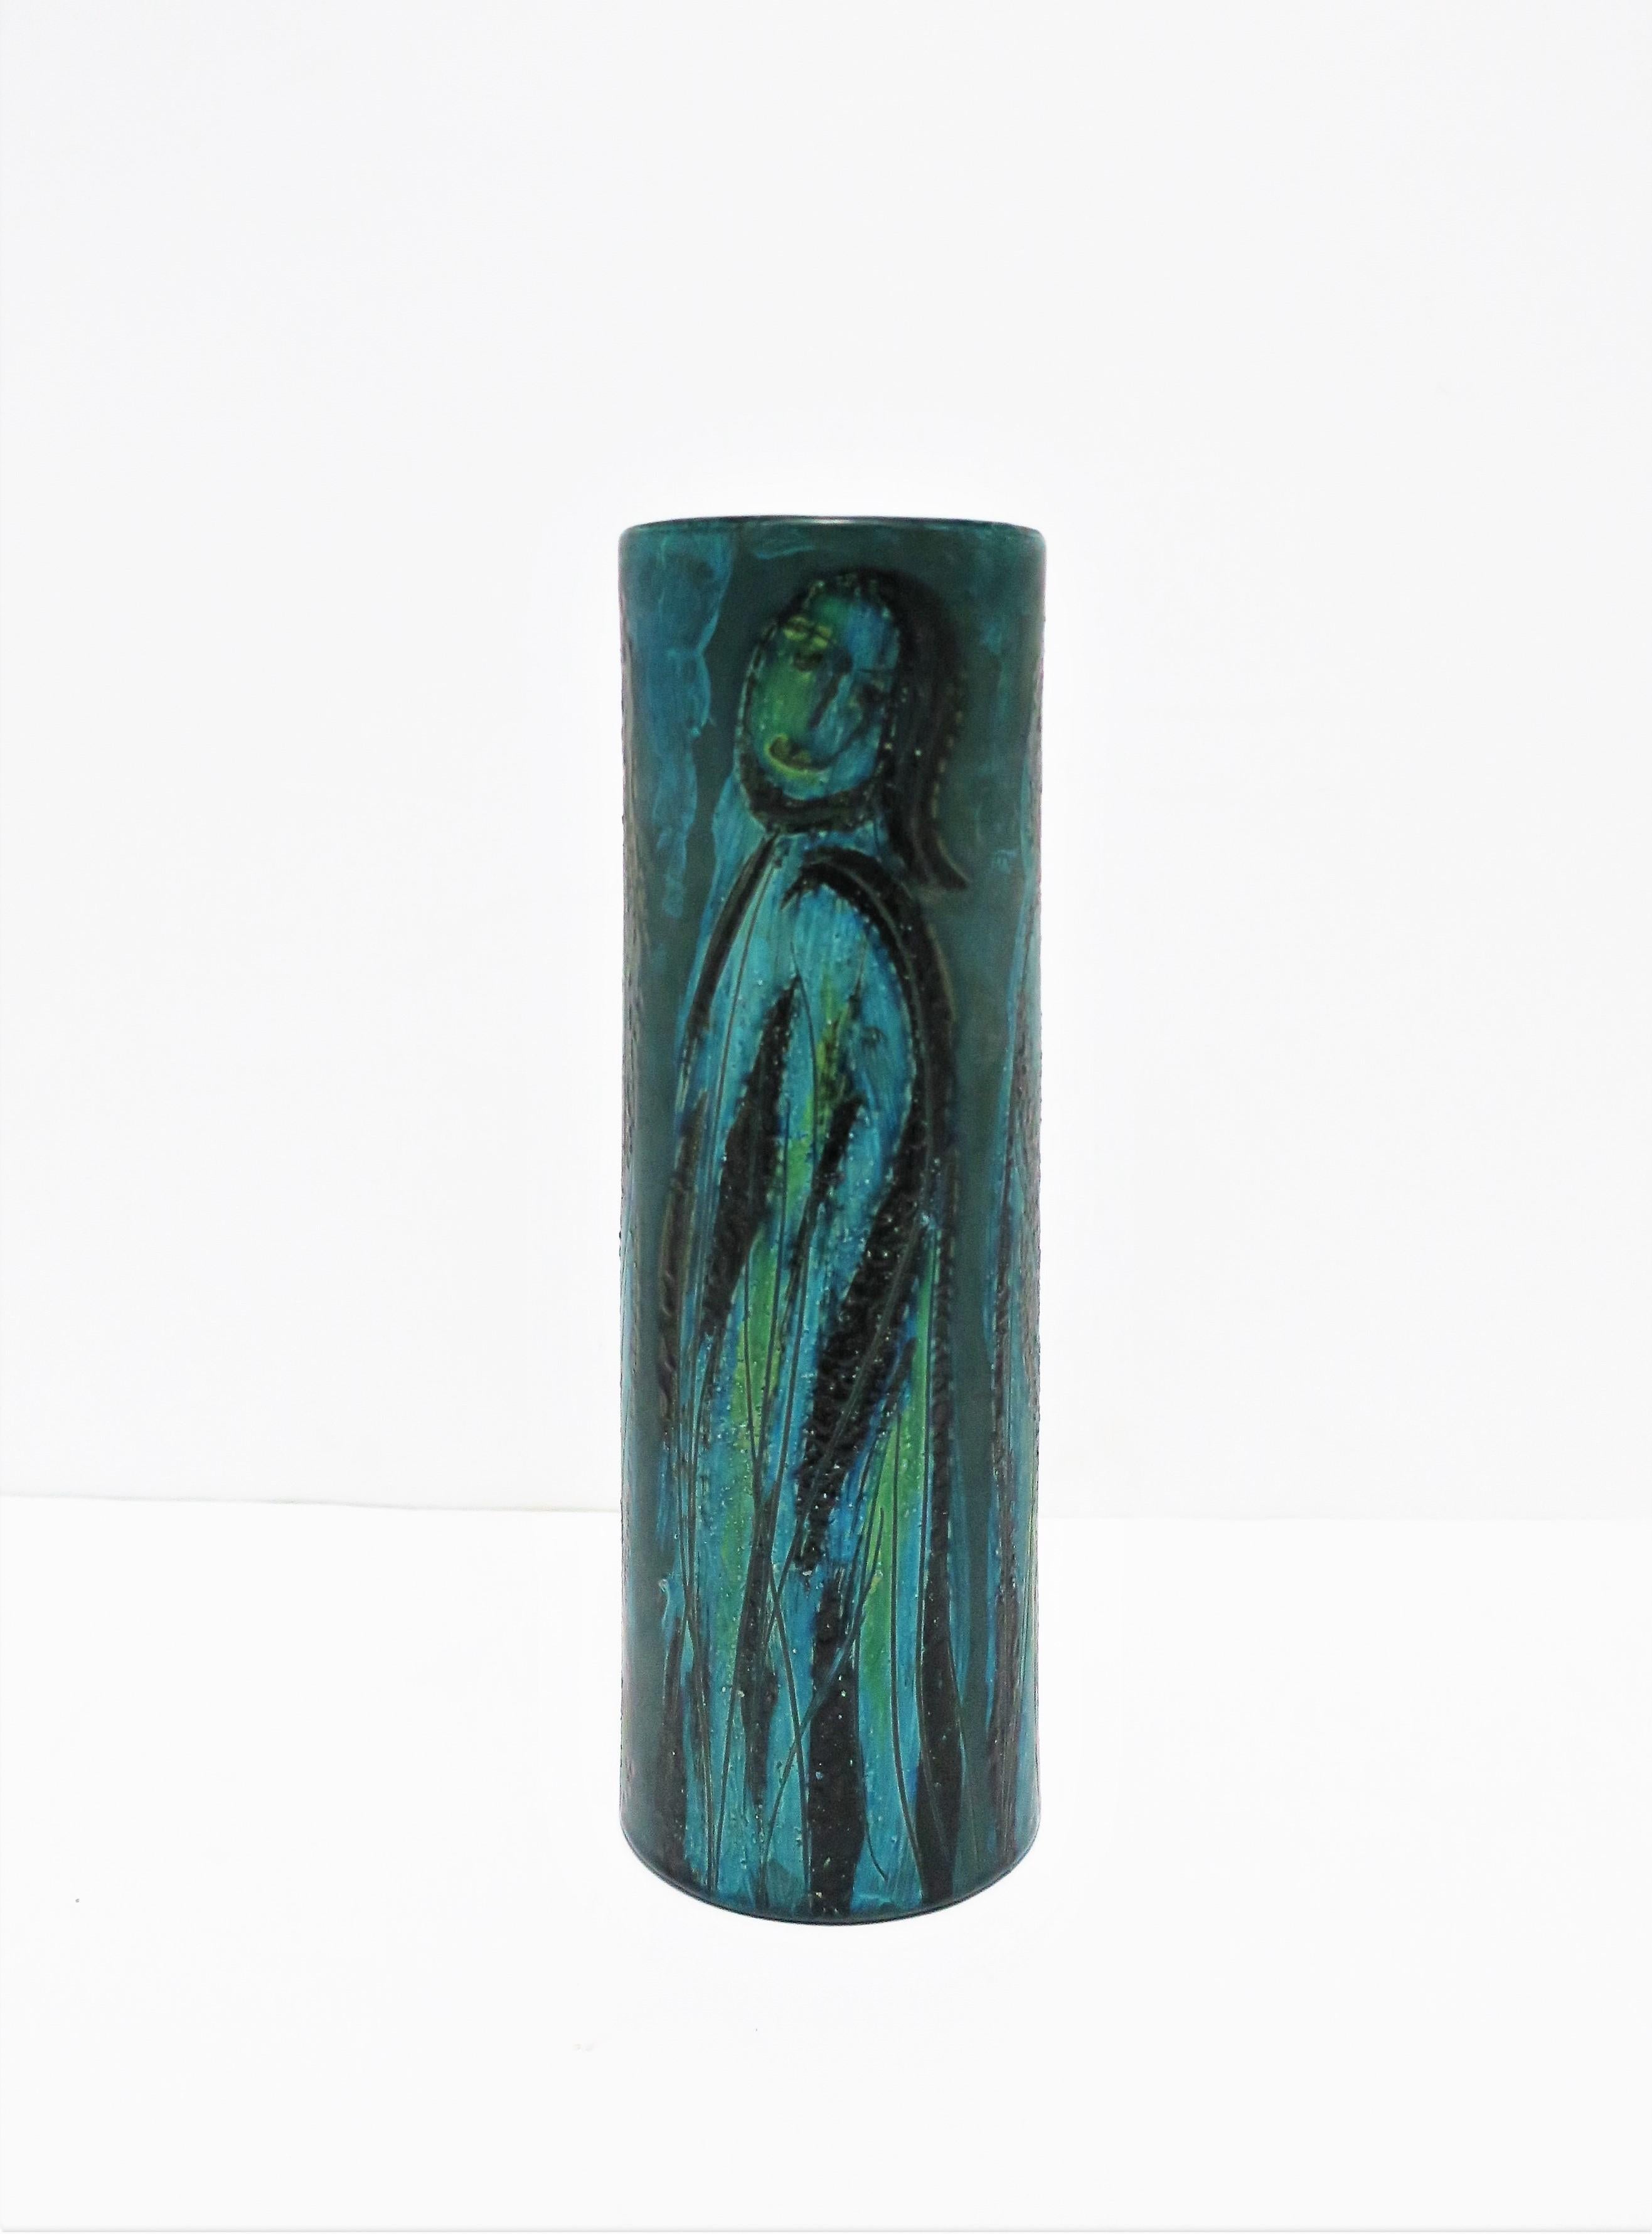 Hand-Painted Italian Blue Pottery Vase with Figurative Design Bitossi, circa 20th Century For Sale